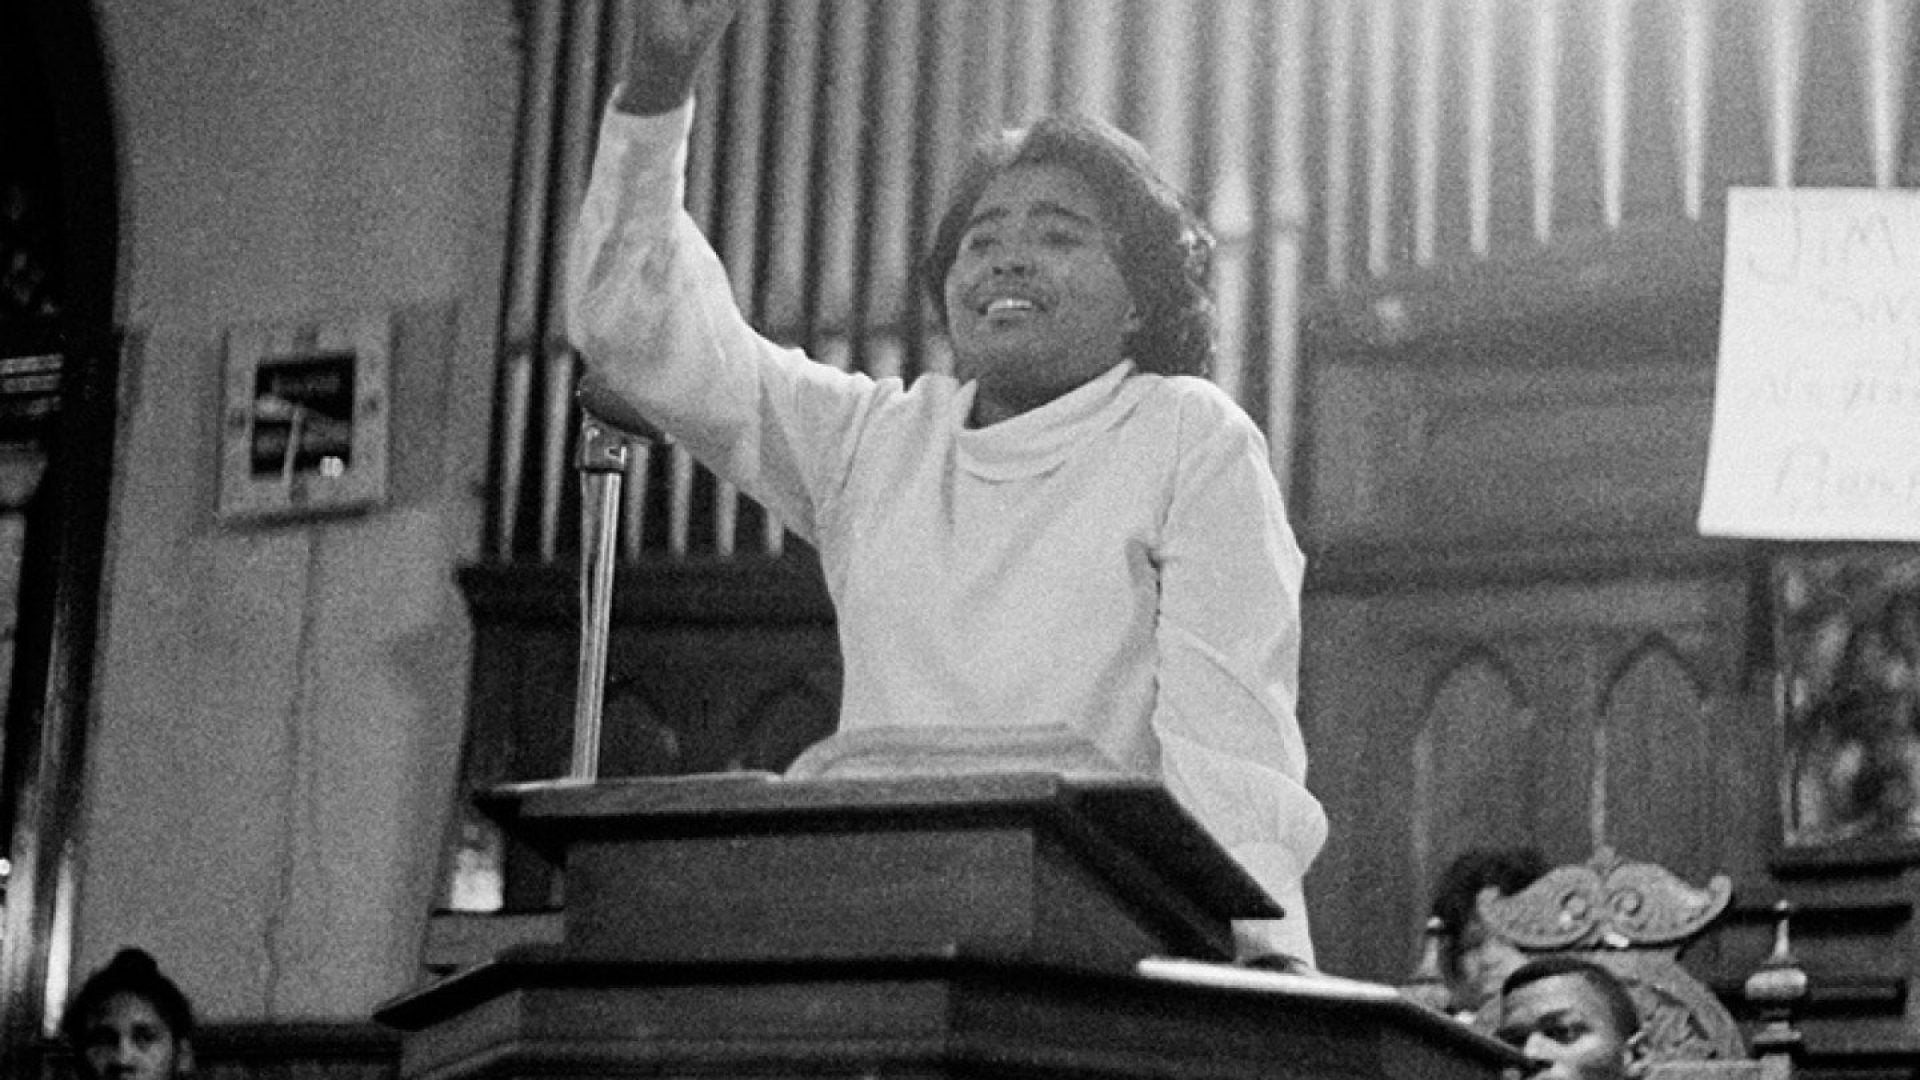 This Black Woman Inspired King's ‘I Have A Dream’ Speech